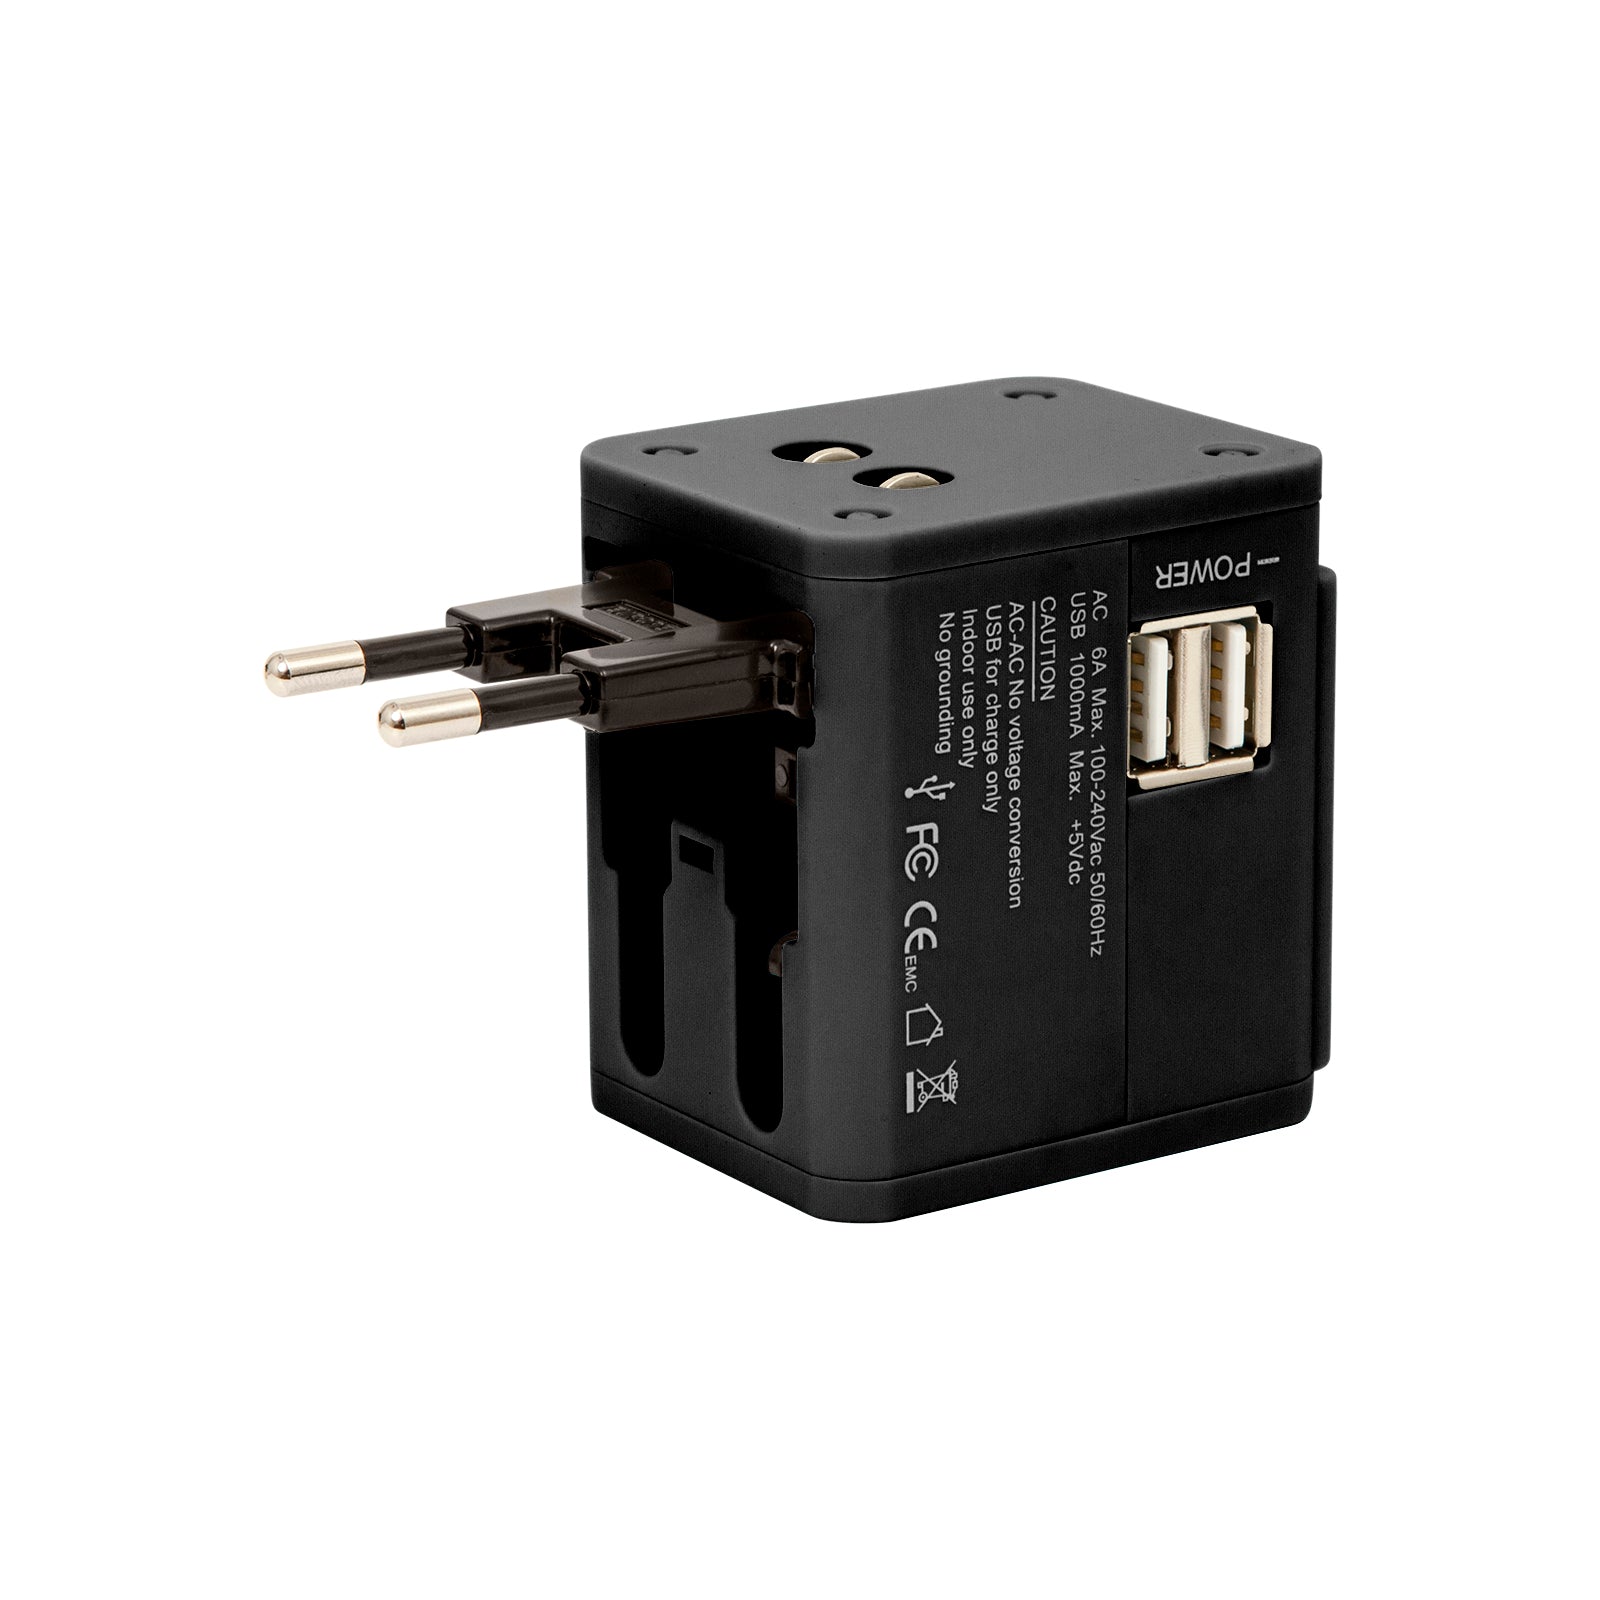 Universal Travel Adapter | Built-in Dual USB Charger | Universal Plug Adapter